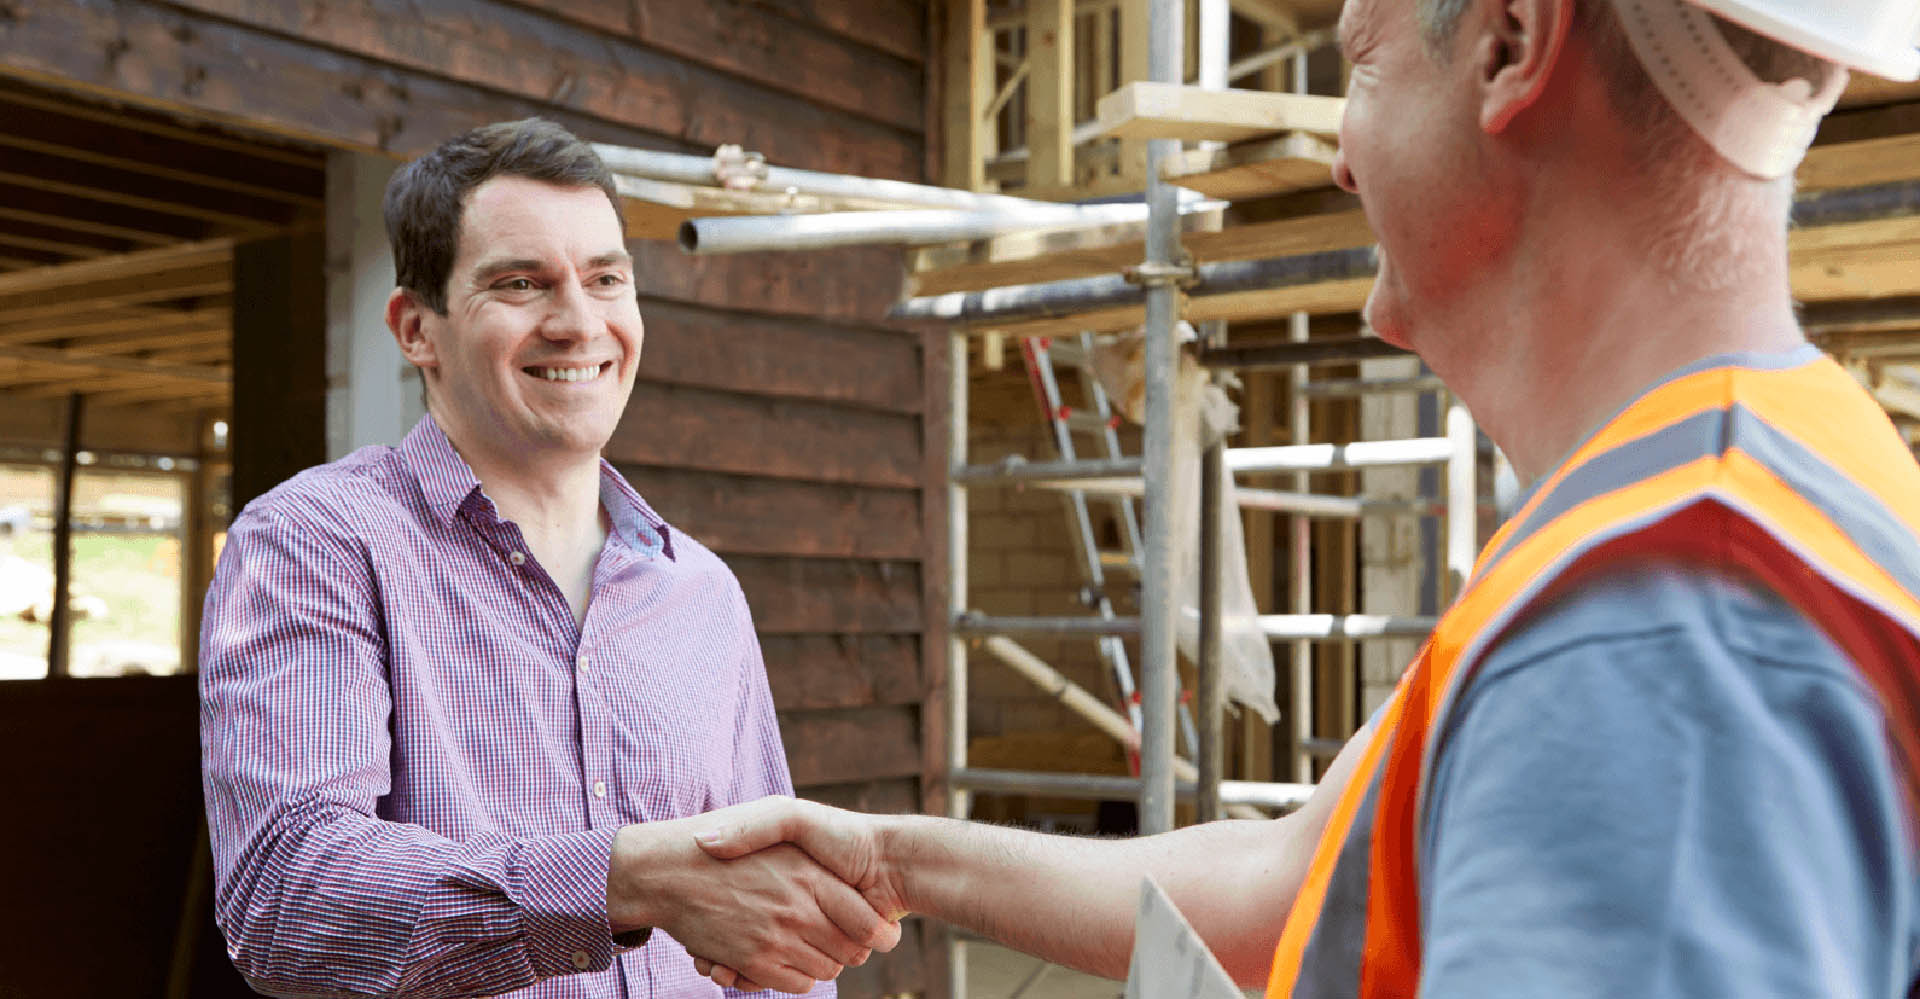 8 Questions to Ask a Builder Shaking Hands Image